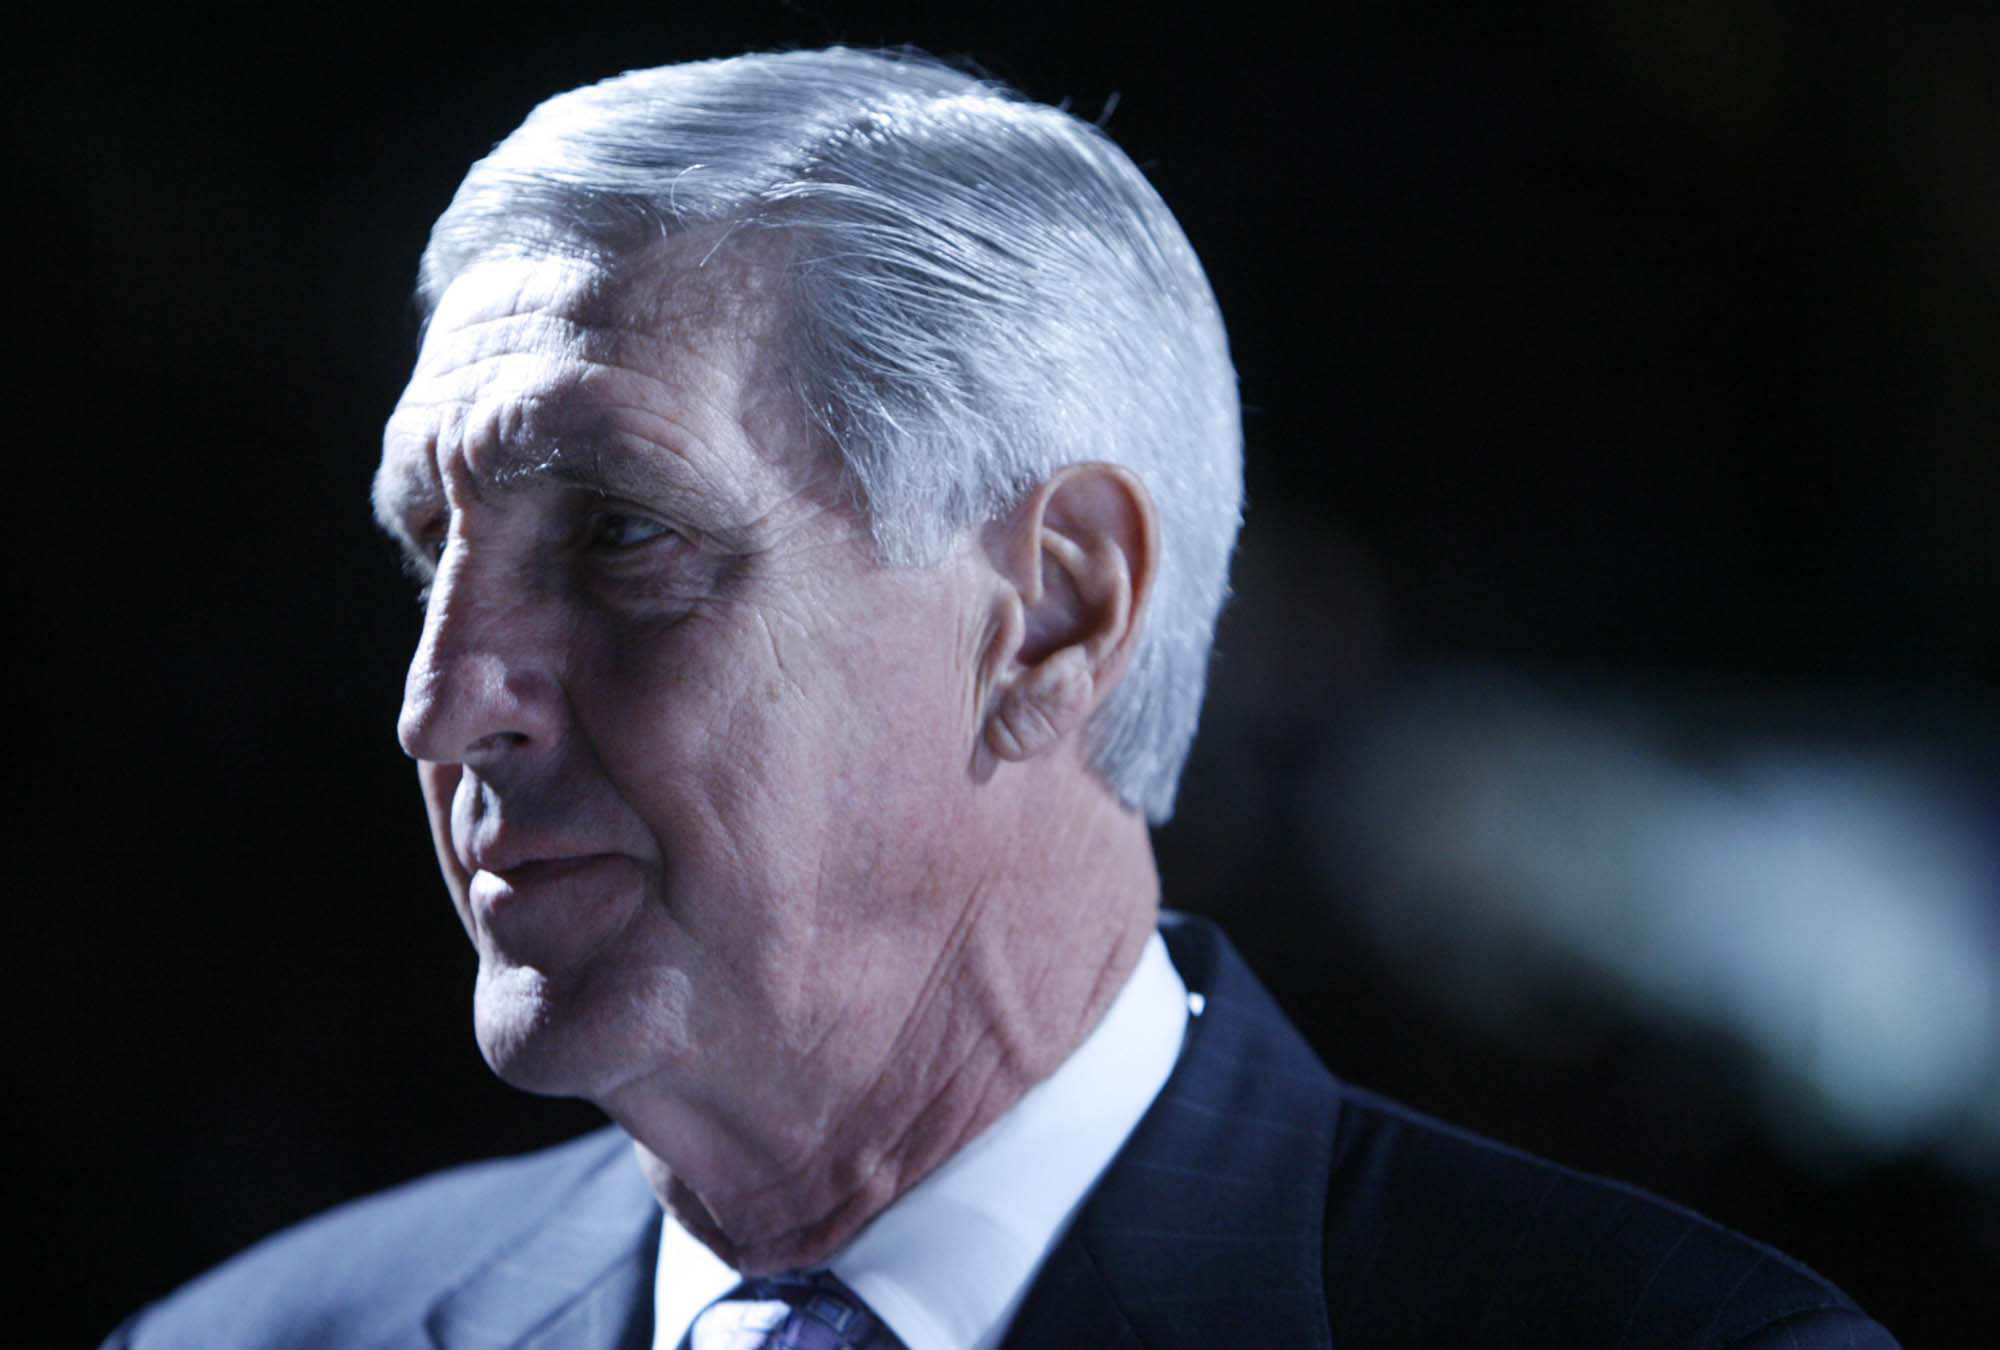 Jerry Sloan, the fiery Chicago Bulls guard and Hall of Fame coach